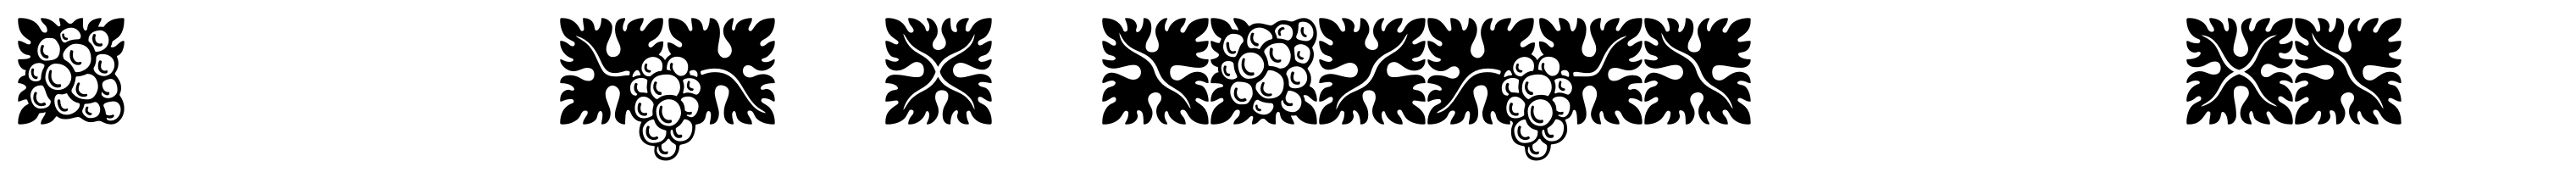 ASTYPE Ornaments Wine Grape A Font Style A